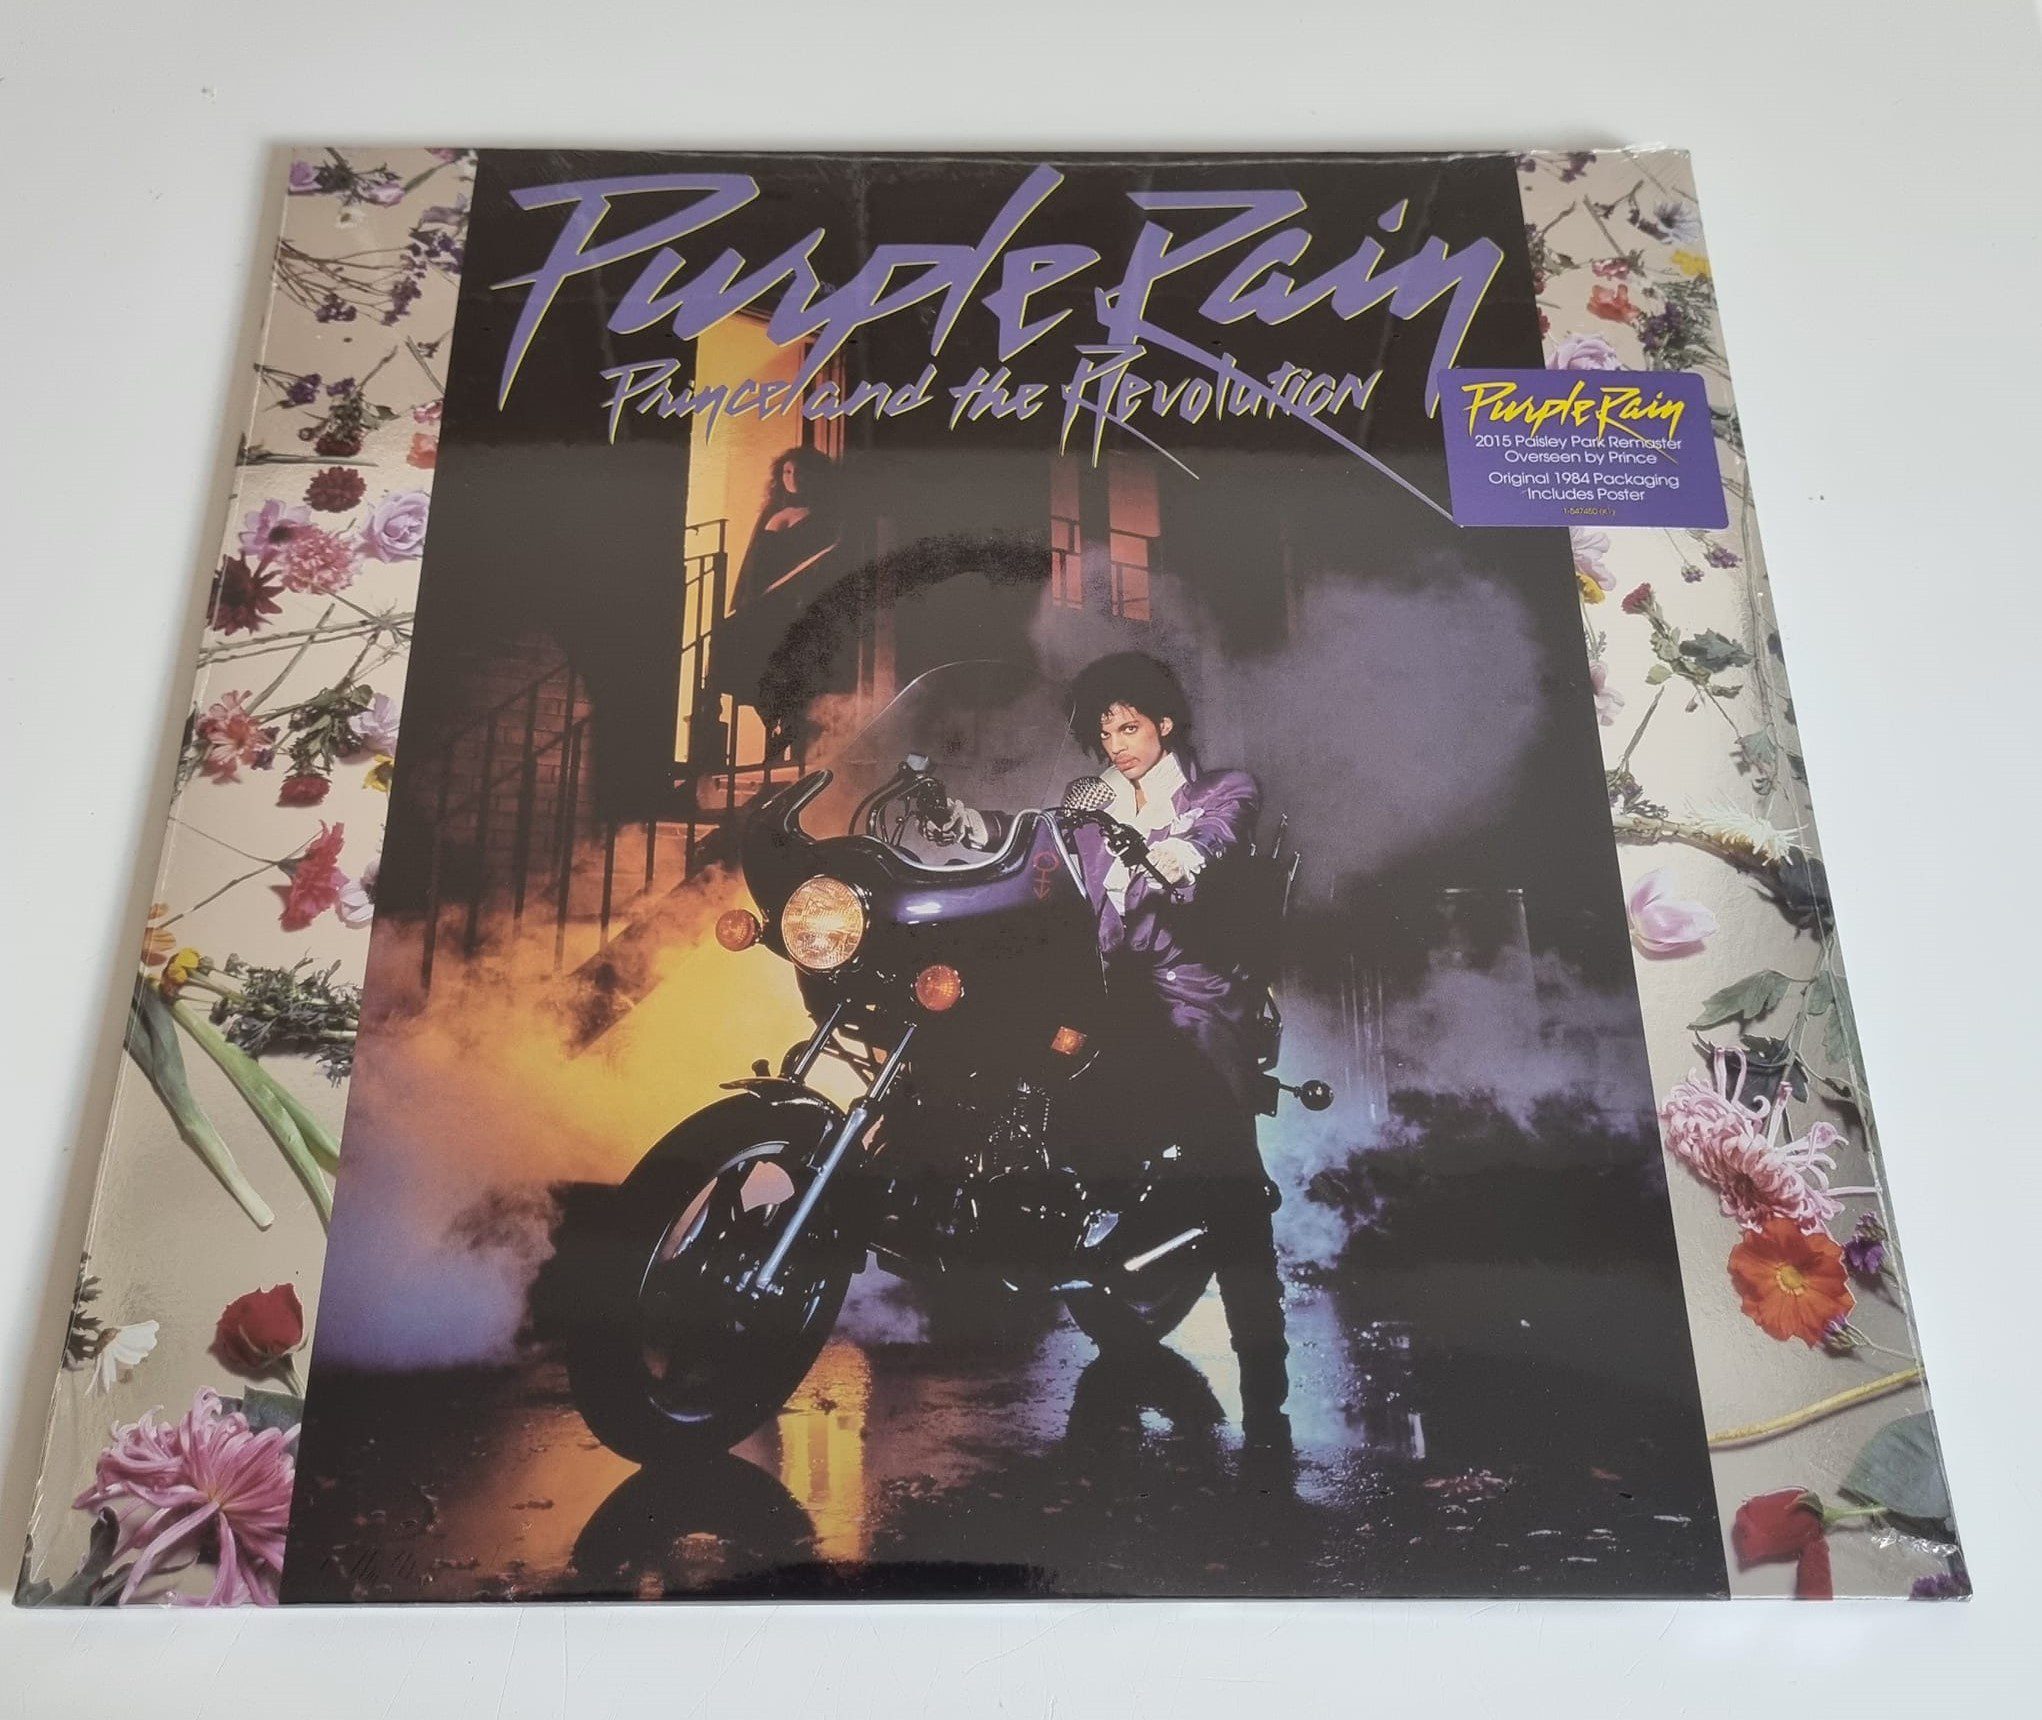 Buy this rare Prince record by clicking here